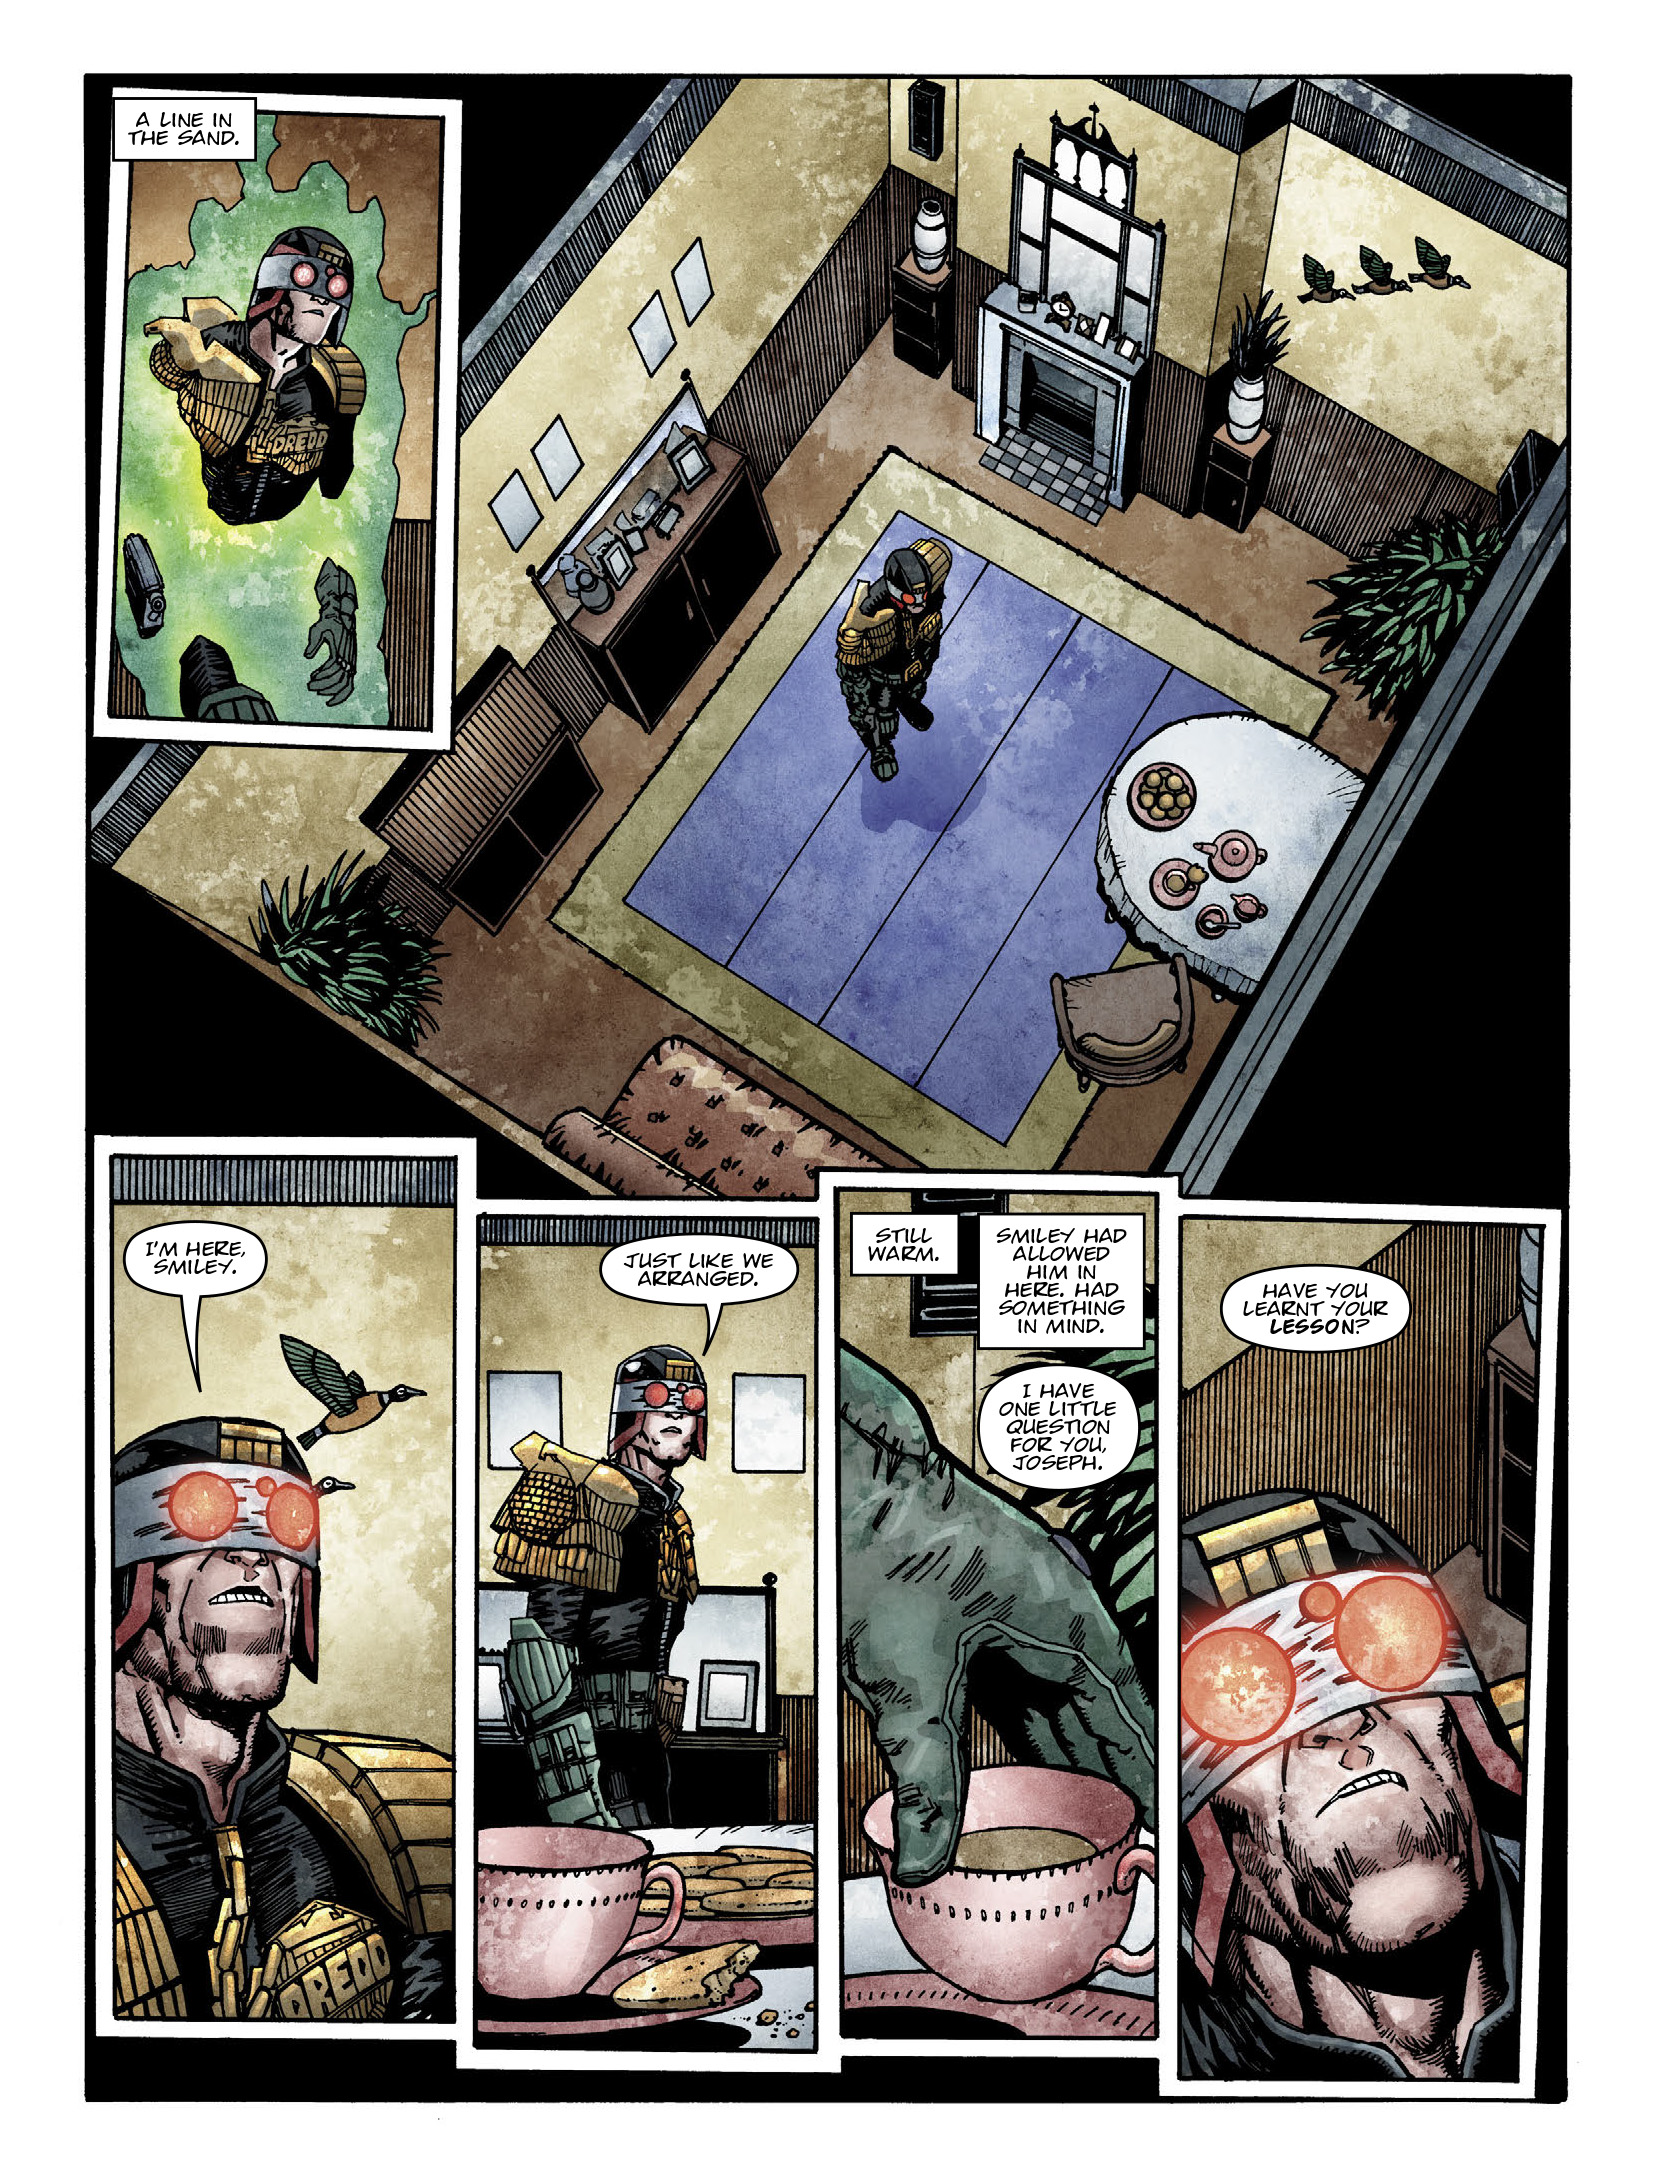 2000 AD: Chapter 2108 - Page 4